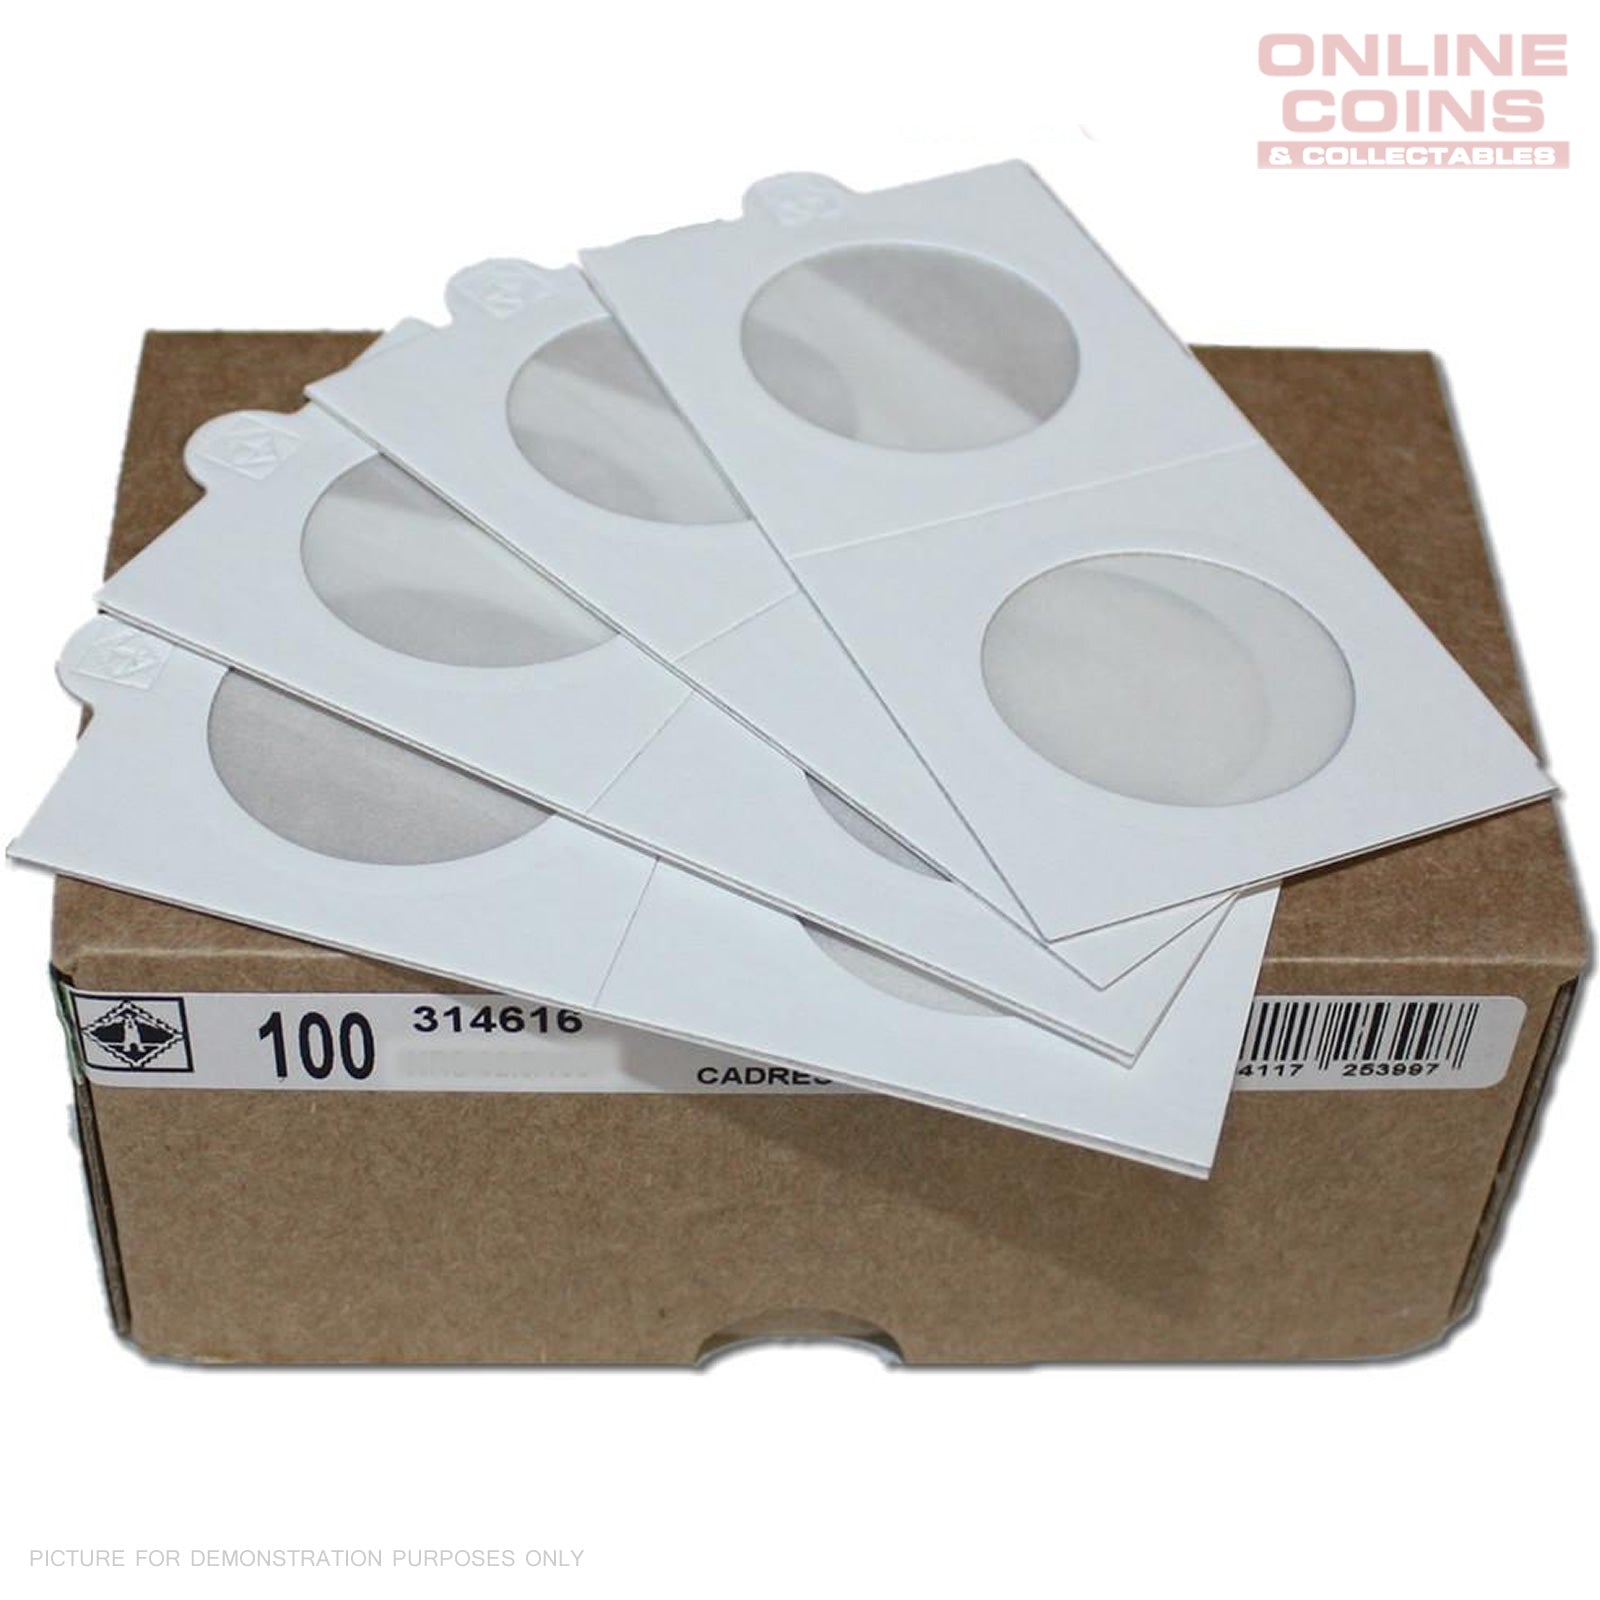 Lighthouse MATRIX WHITE Self Adhesive Coin Holders x 100, 30mm Pack of 100 (Suitable For Australian 20c And Florins)